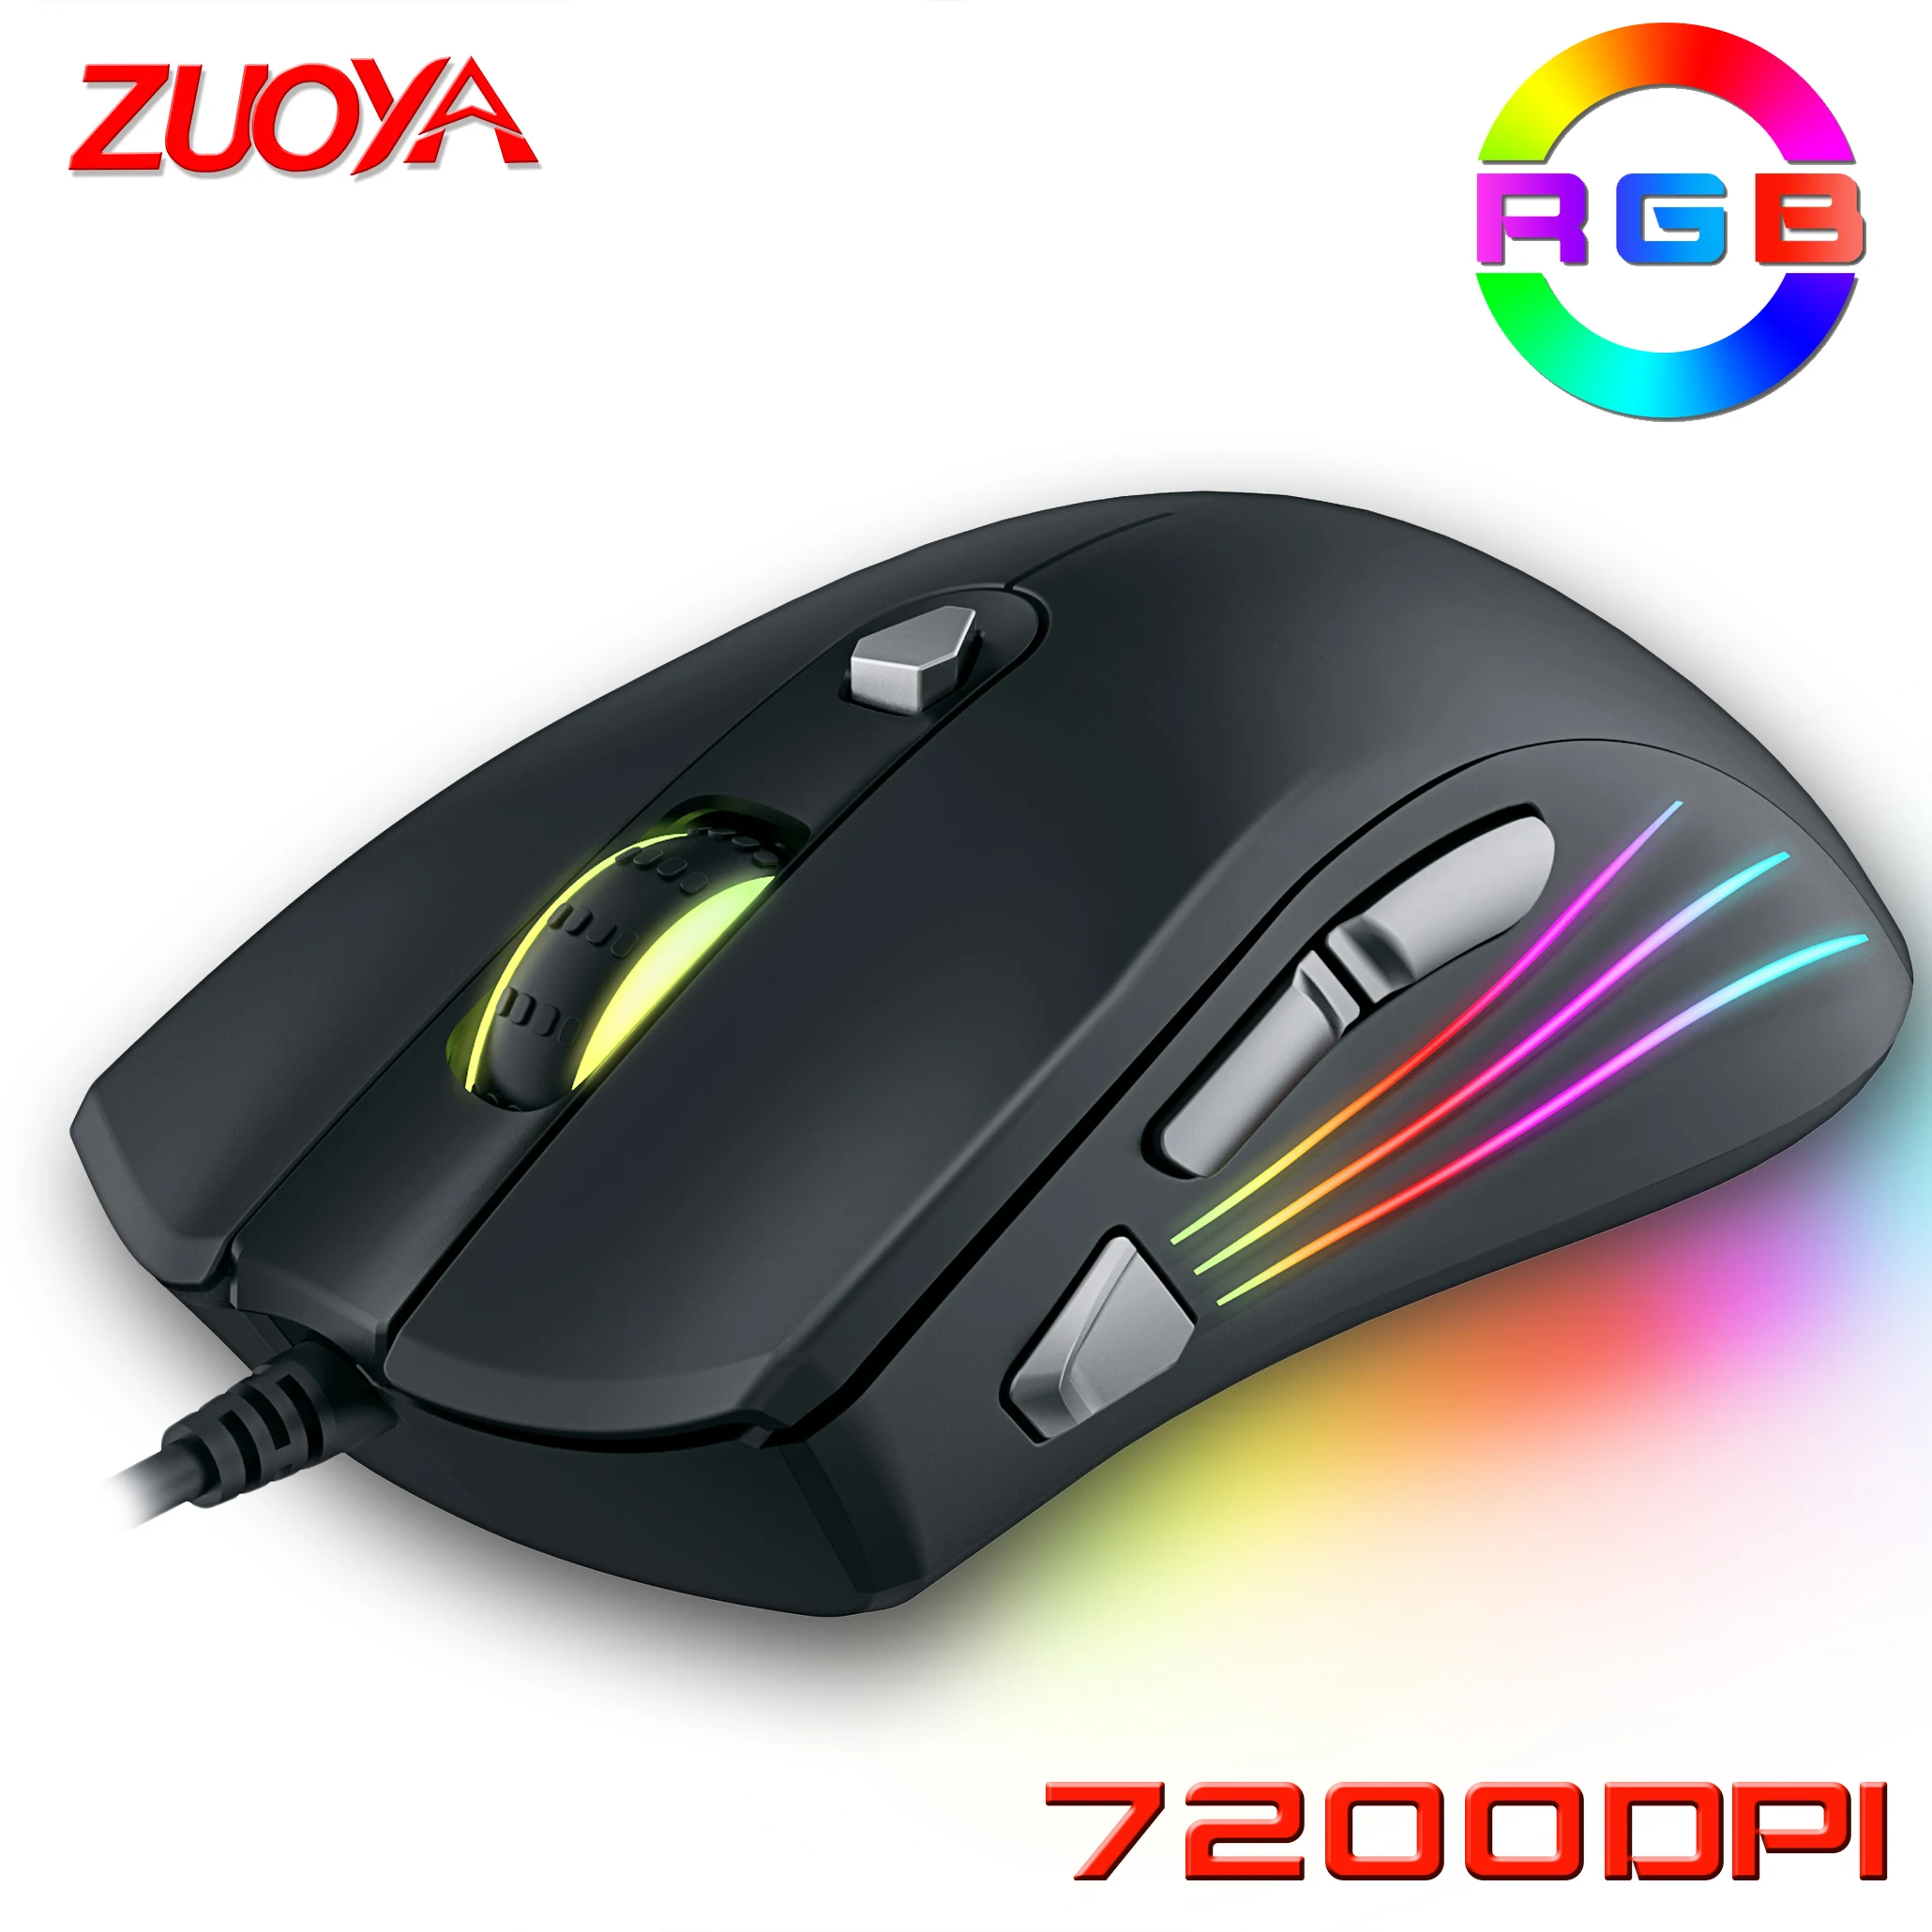 Original Wired Profession Gaming Mouse Mice 3600/7200DPI RGB Backlight LED Optical Sensor 7 Button For Laptop Computer PC Gamer